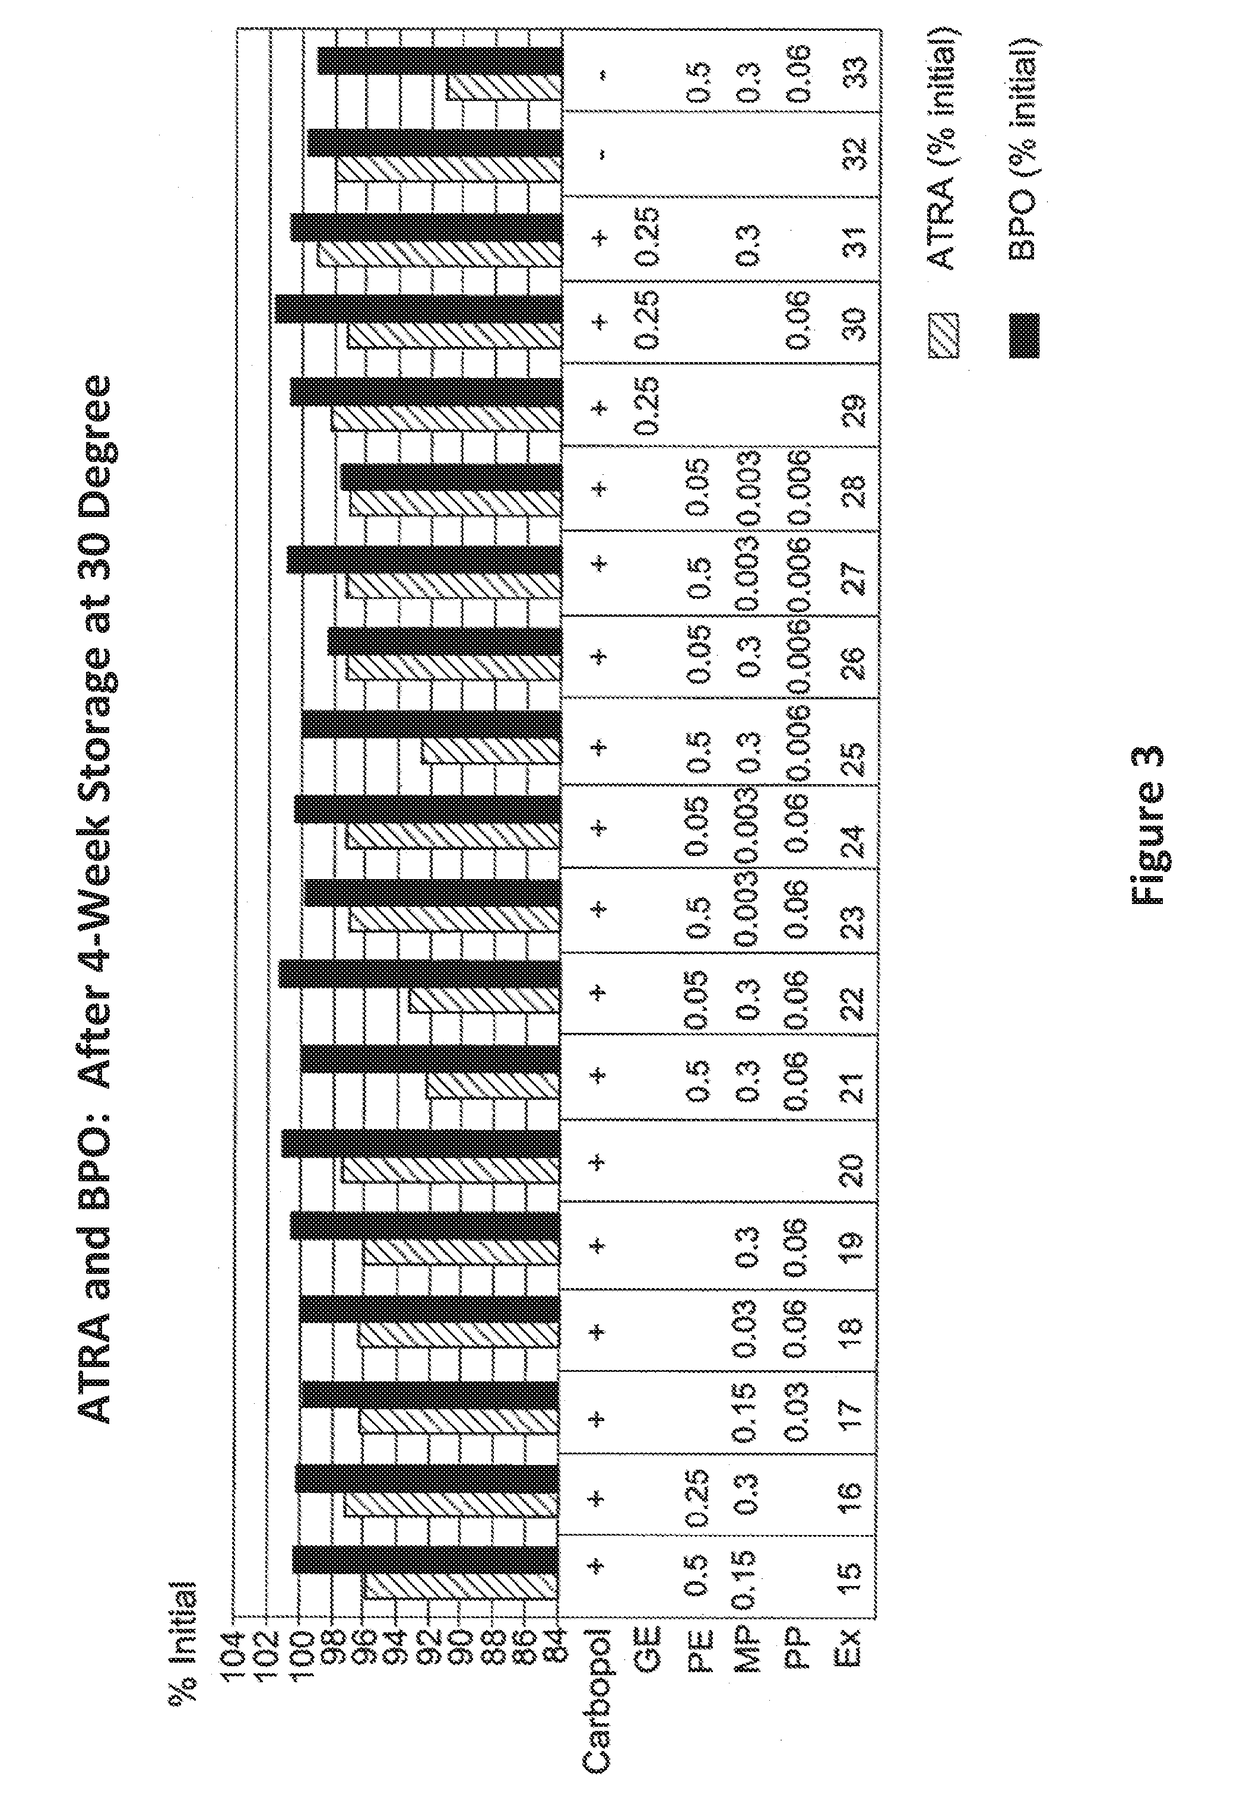 Method of acne treatment by concomitant topical administration of benzoyl peroxide and tretinoin